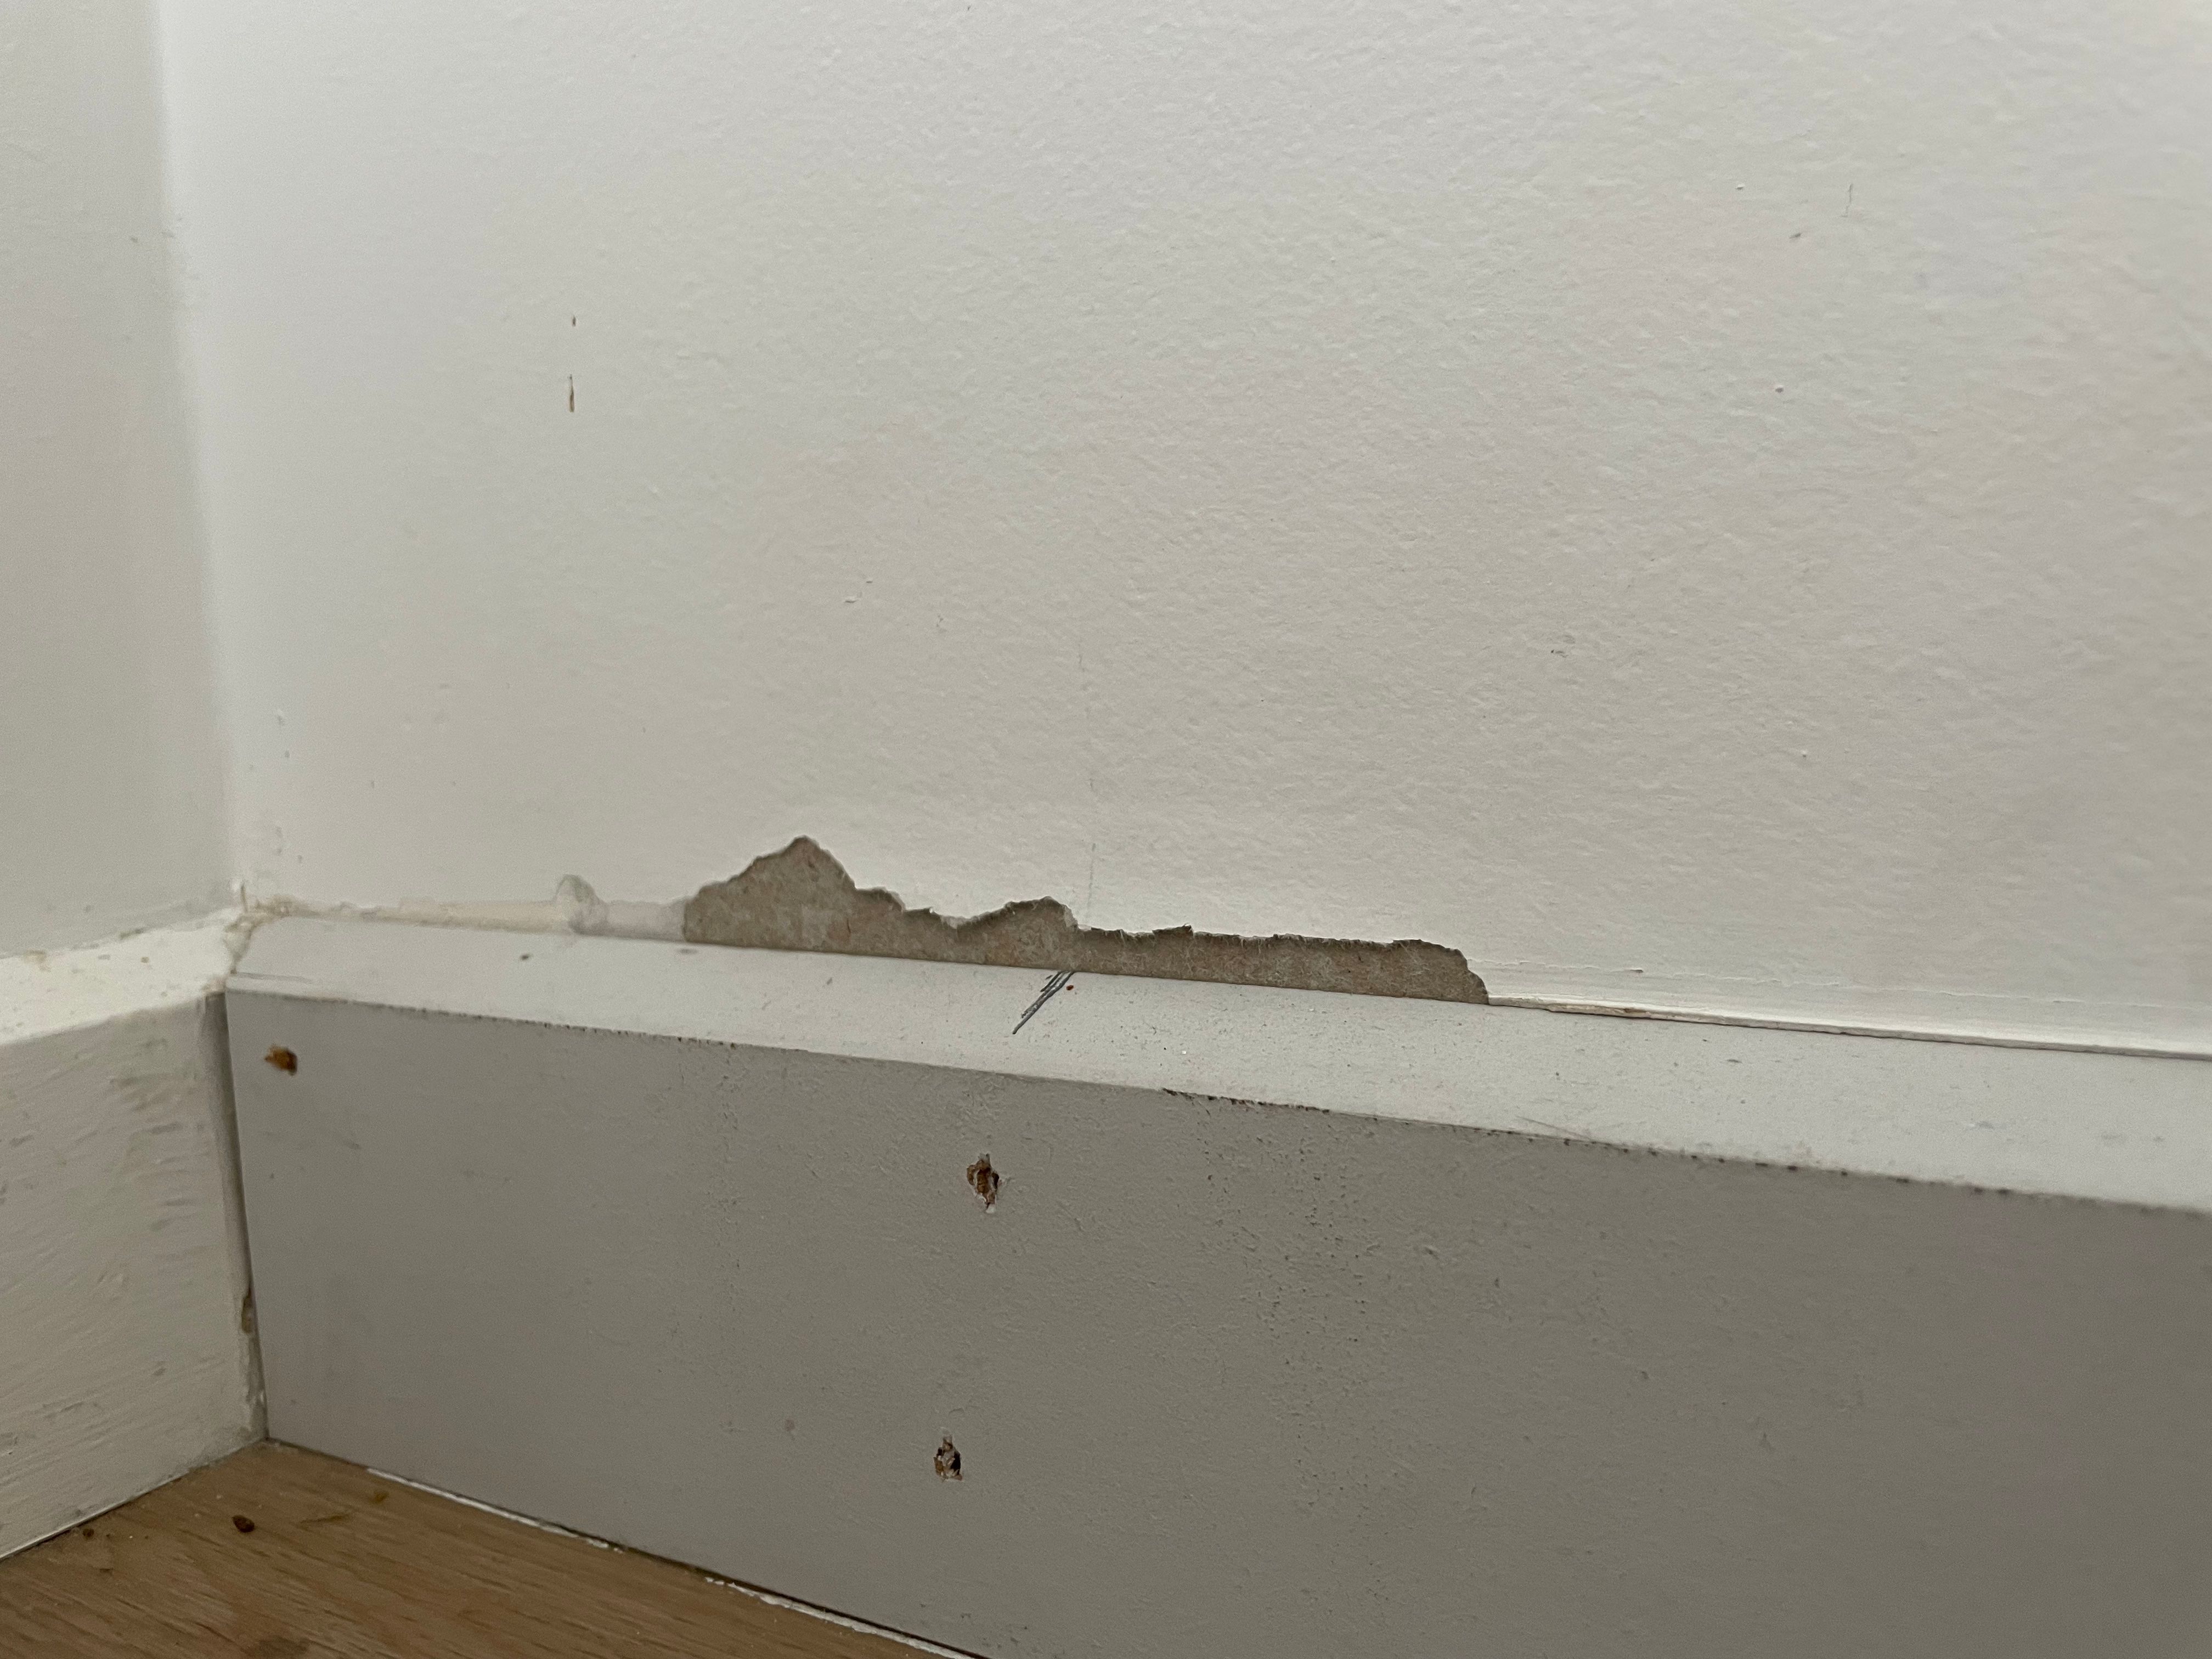 How to fix damaged plasterboard? | Bunnings Workshop community